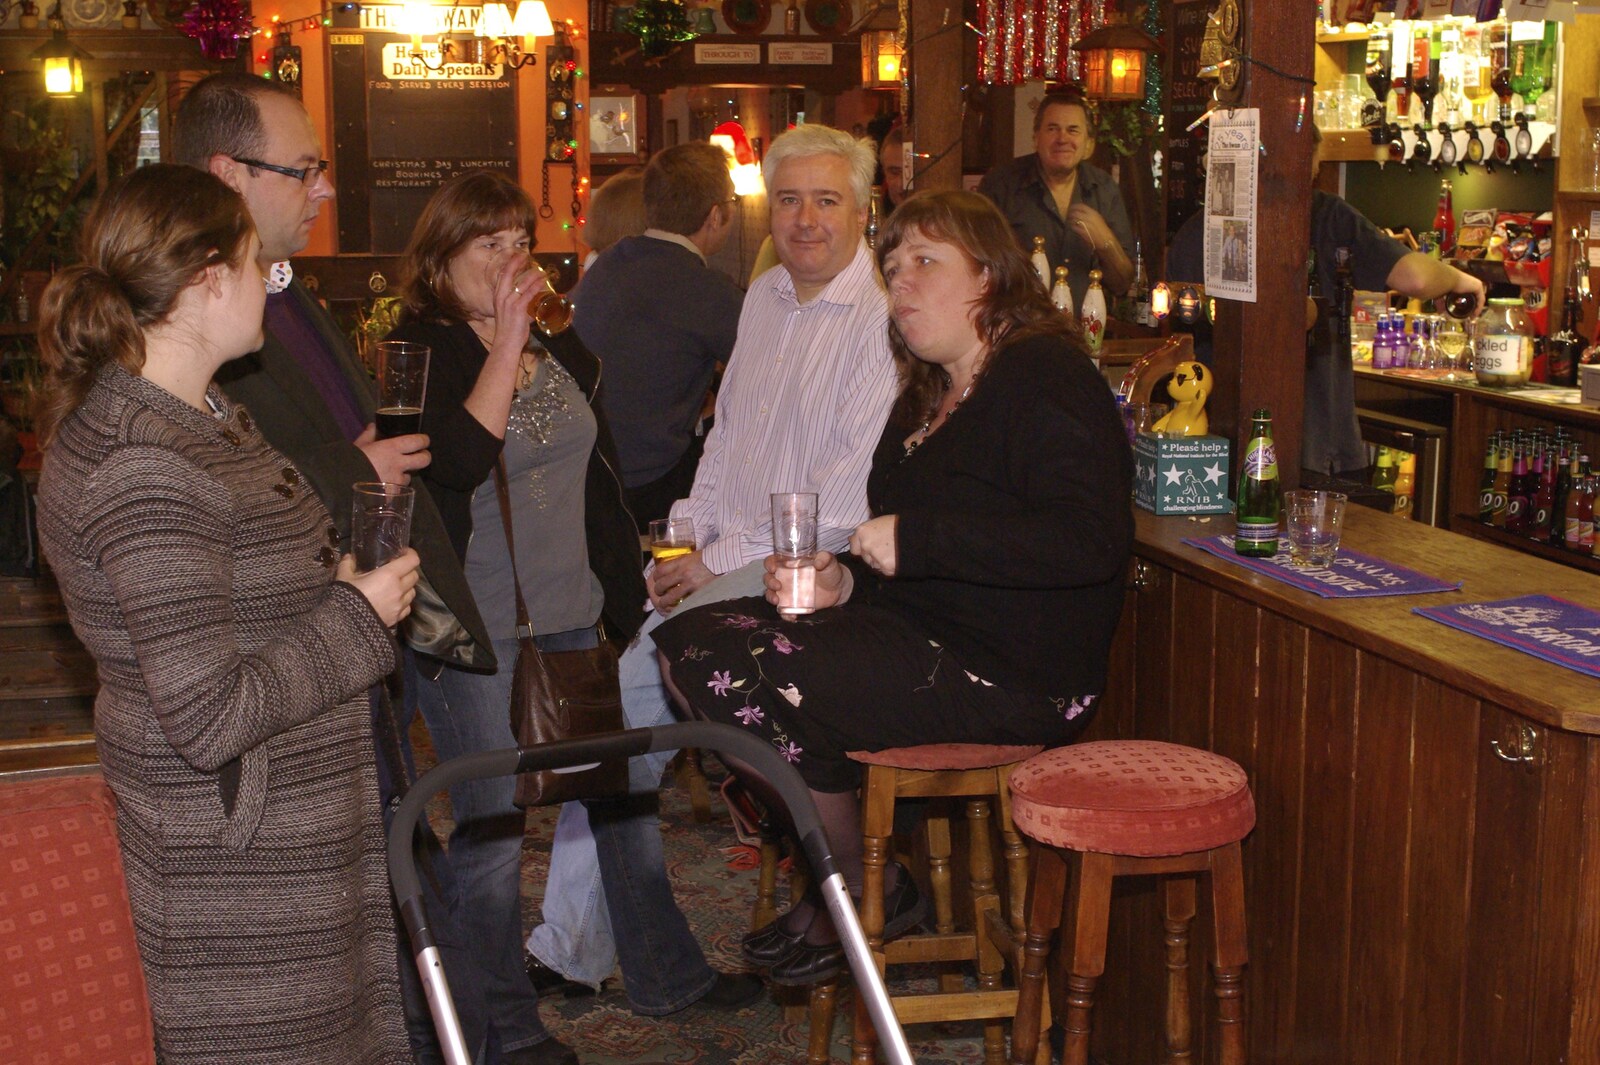 The gang in the pub from Fred's First Christmas, Brome, Suffolk - 25th December 2008